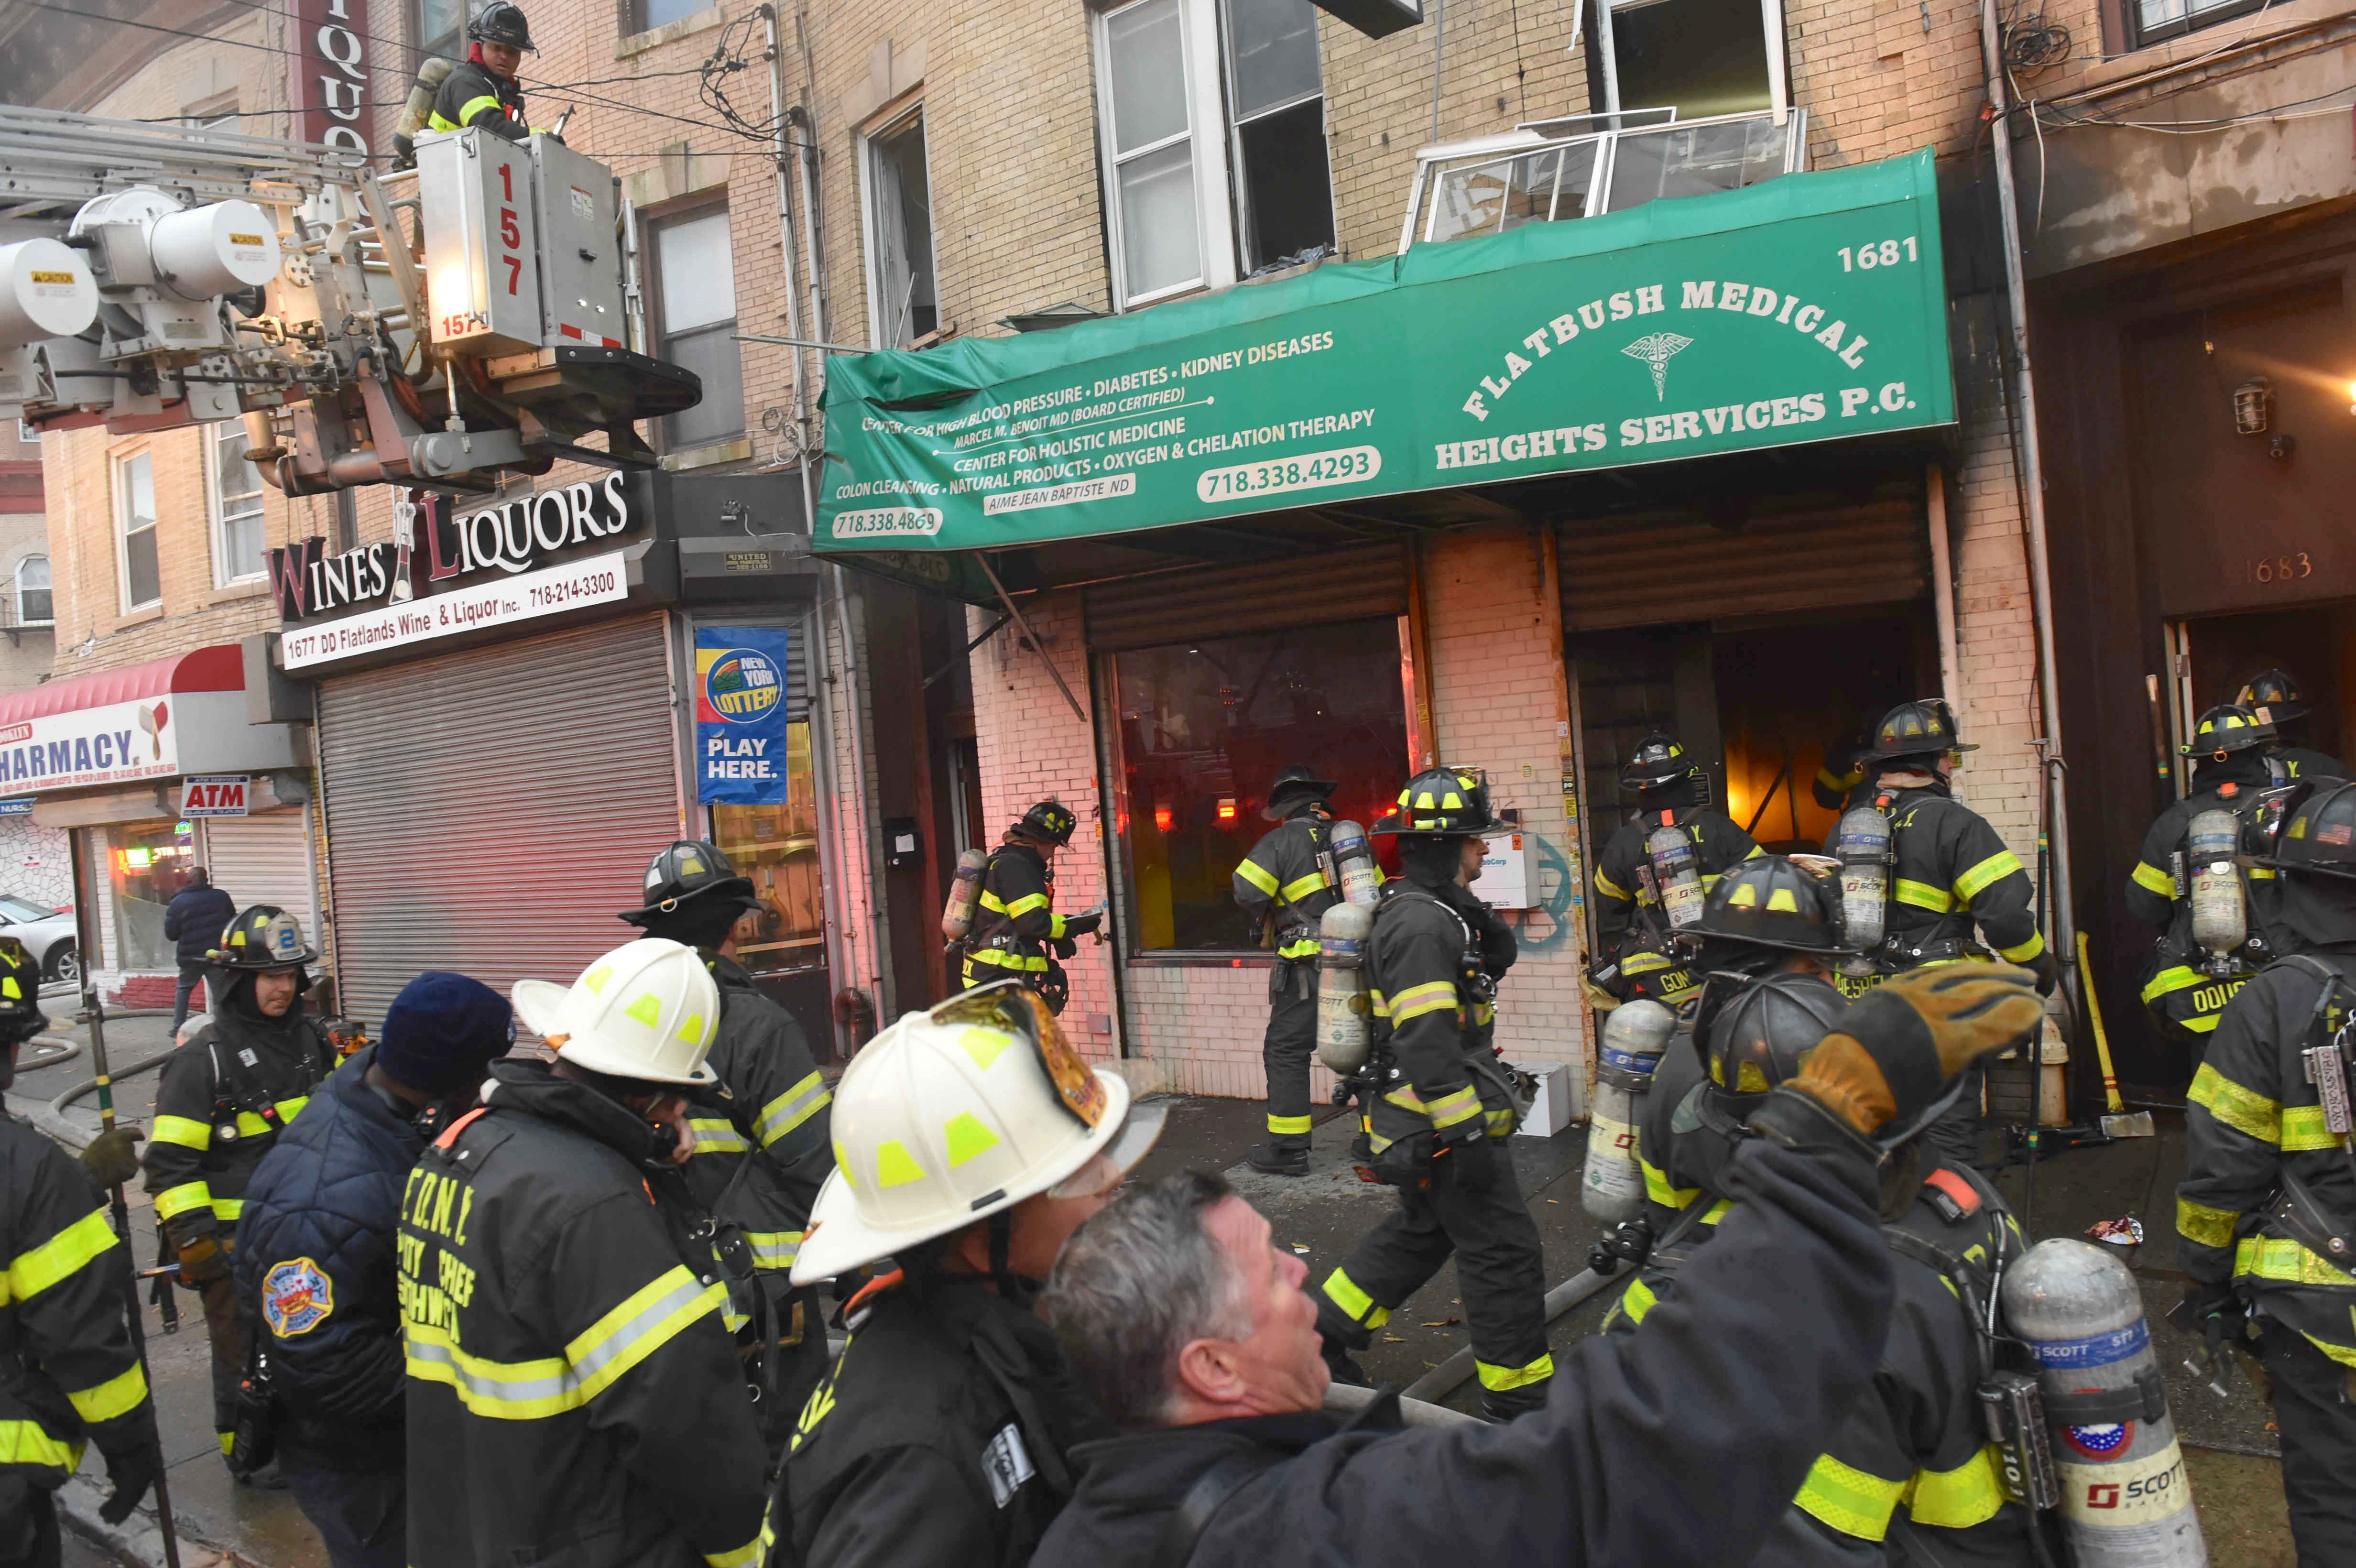 Firefighters battle two-alarm fire in a medical clinic on Flatbush Avenue. Eagle photos by Todd Maisel